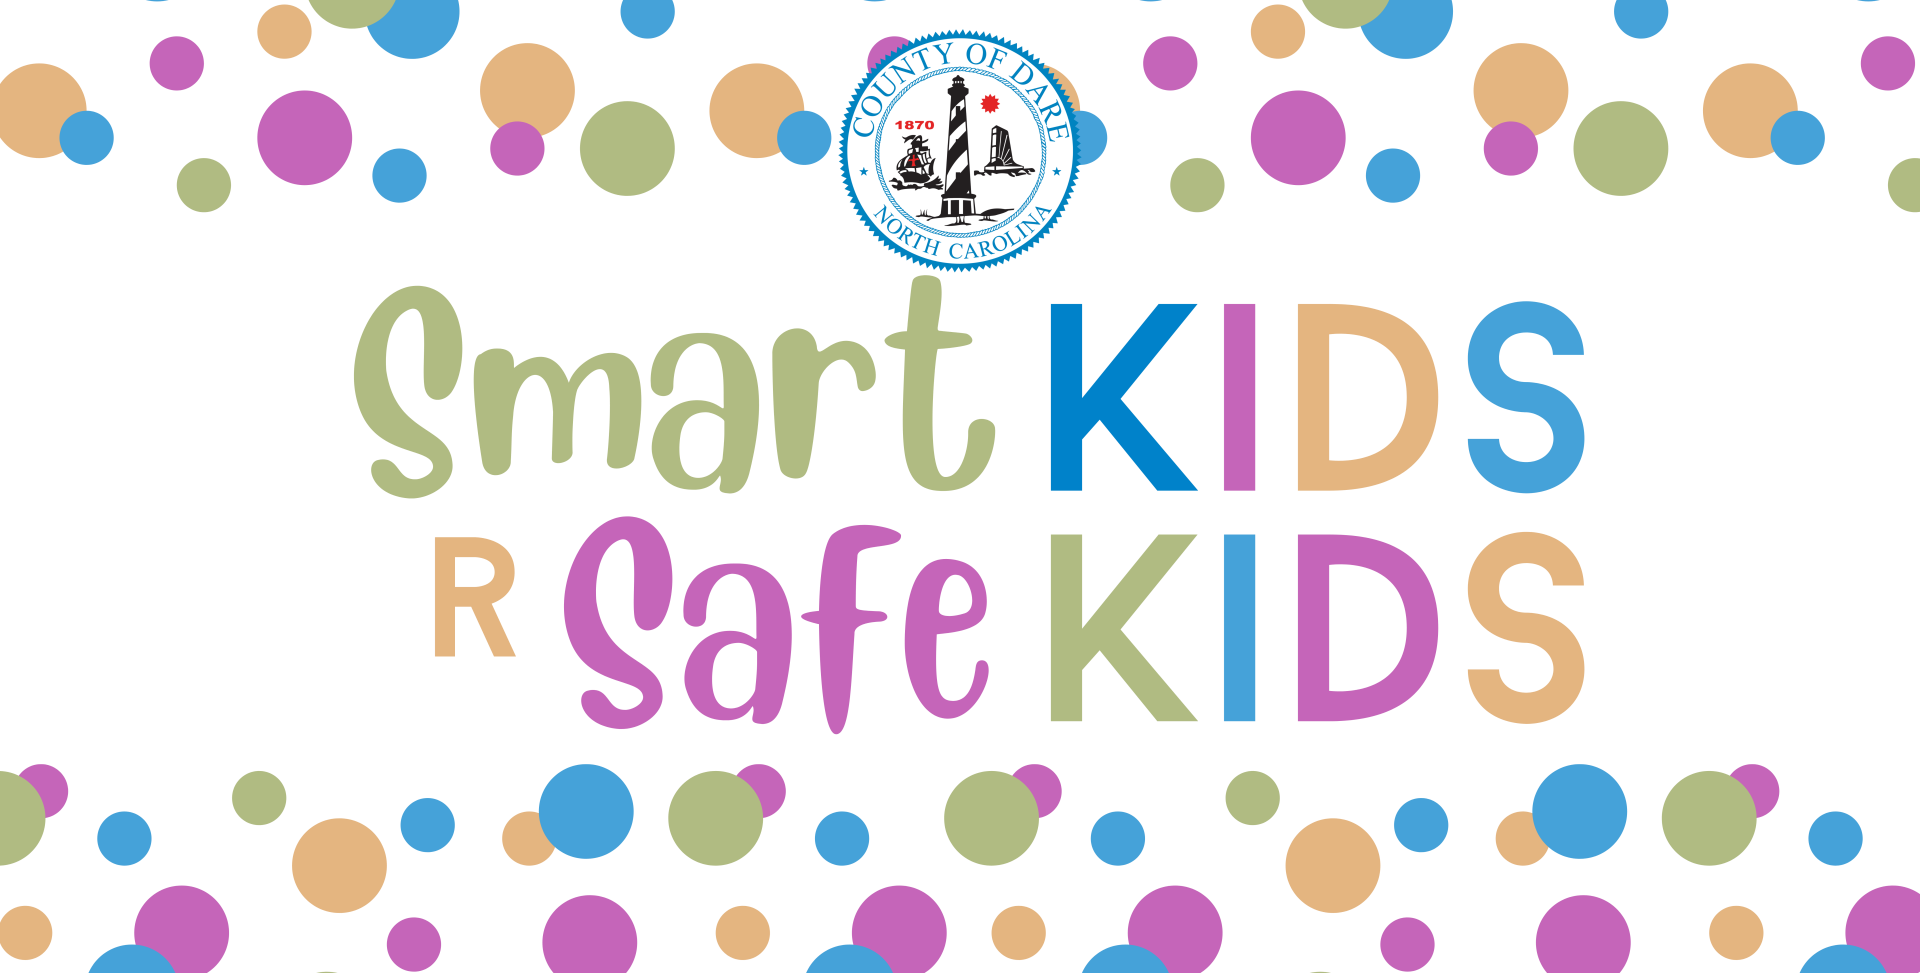 Smart Kids R Safe Kids Banner with polkadots and county seal